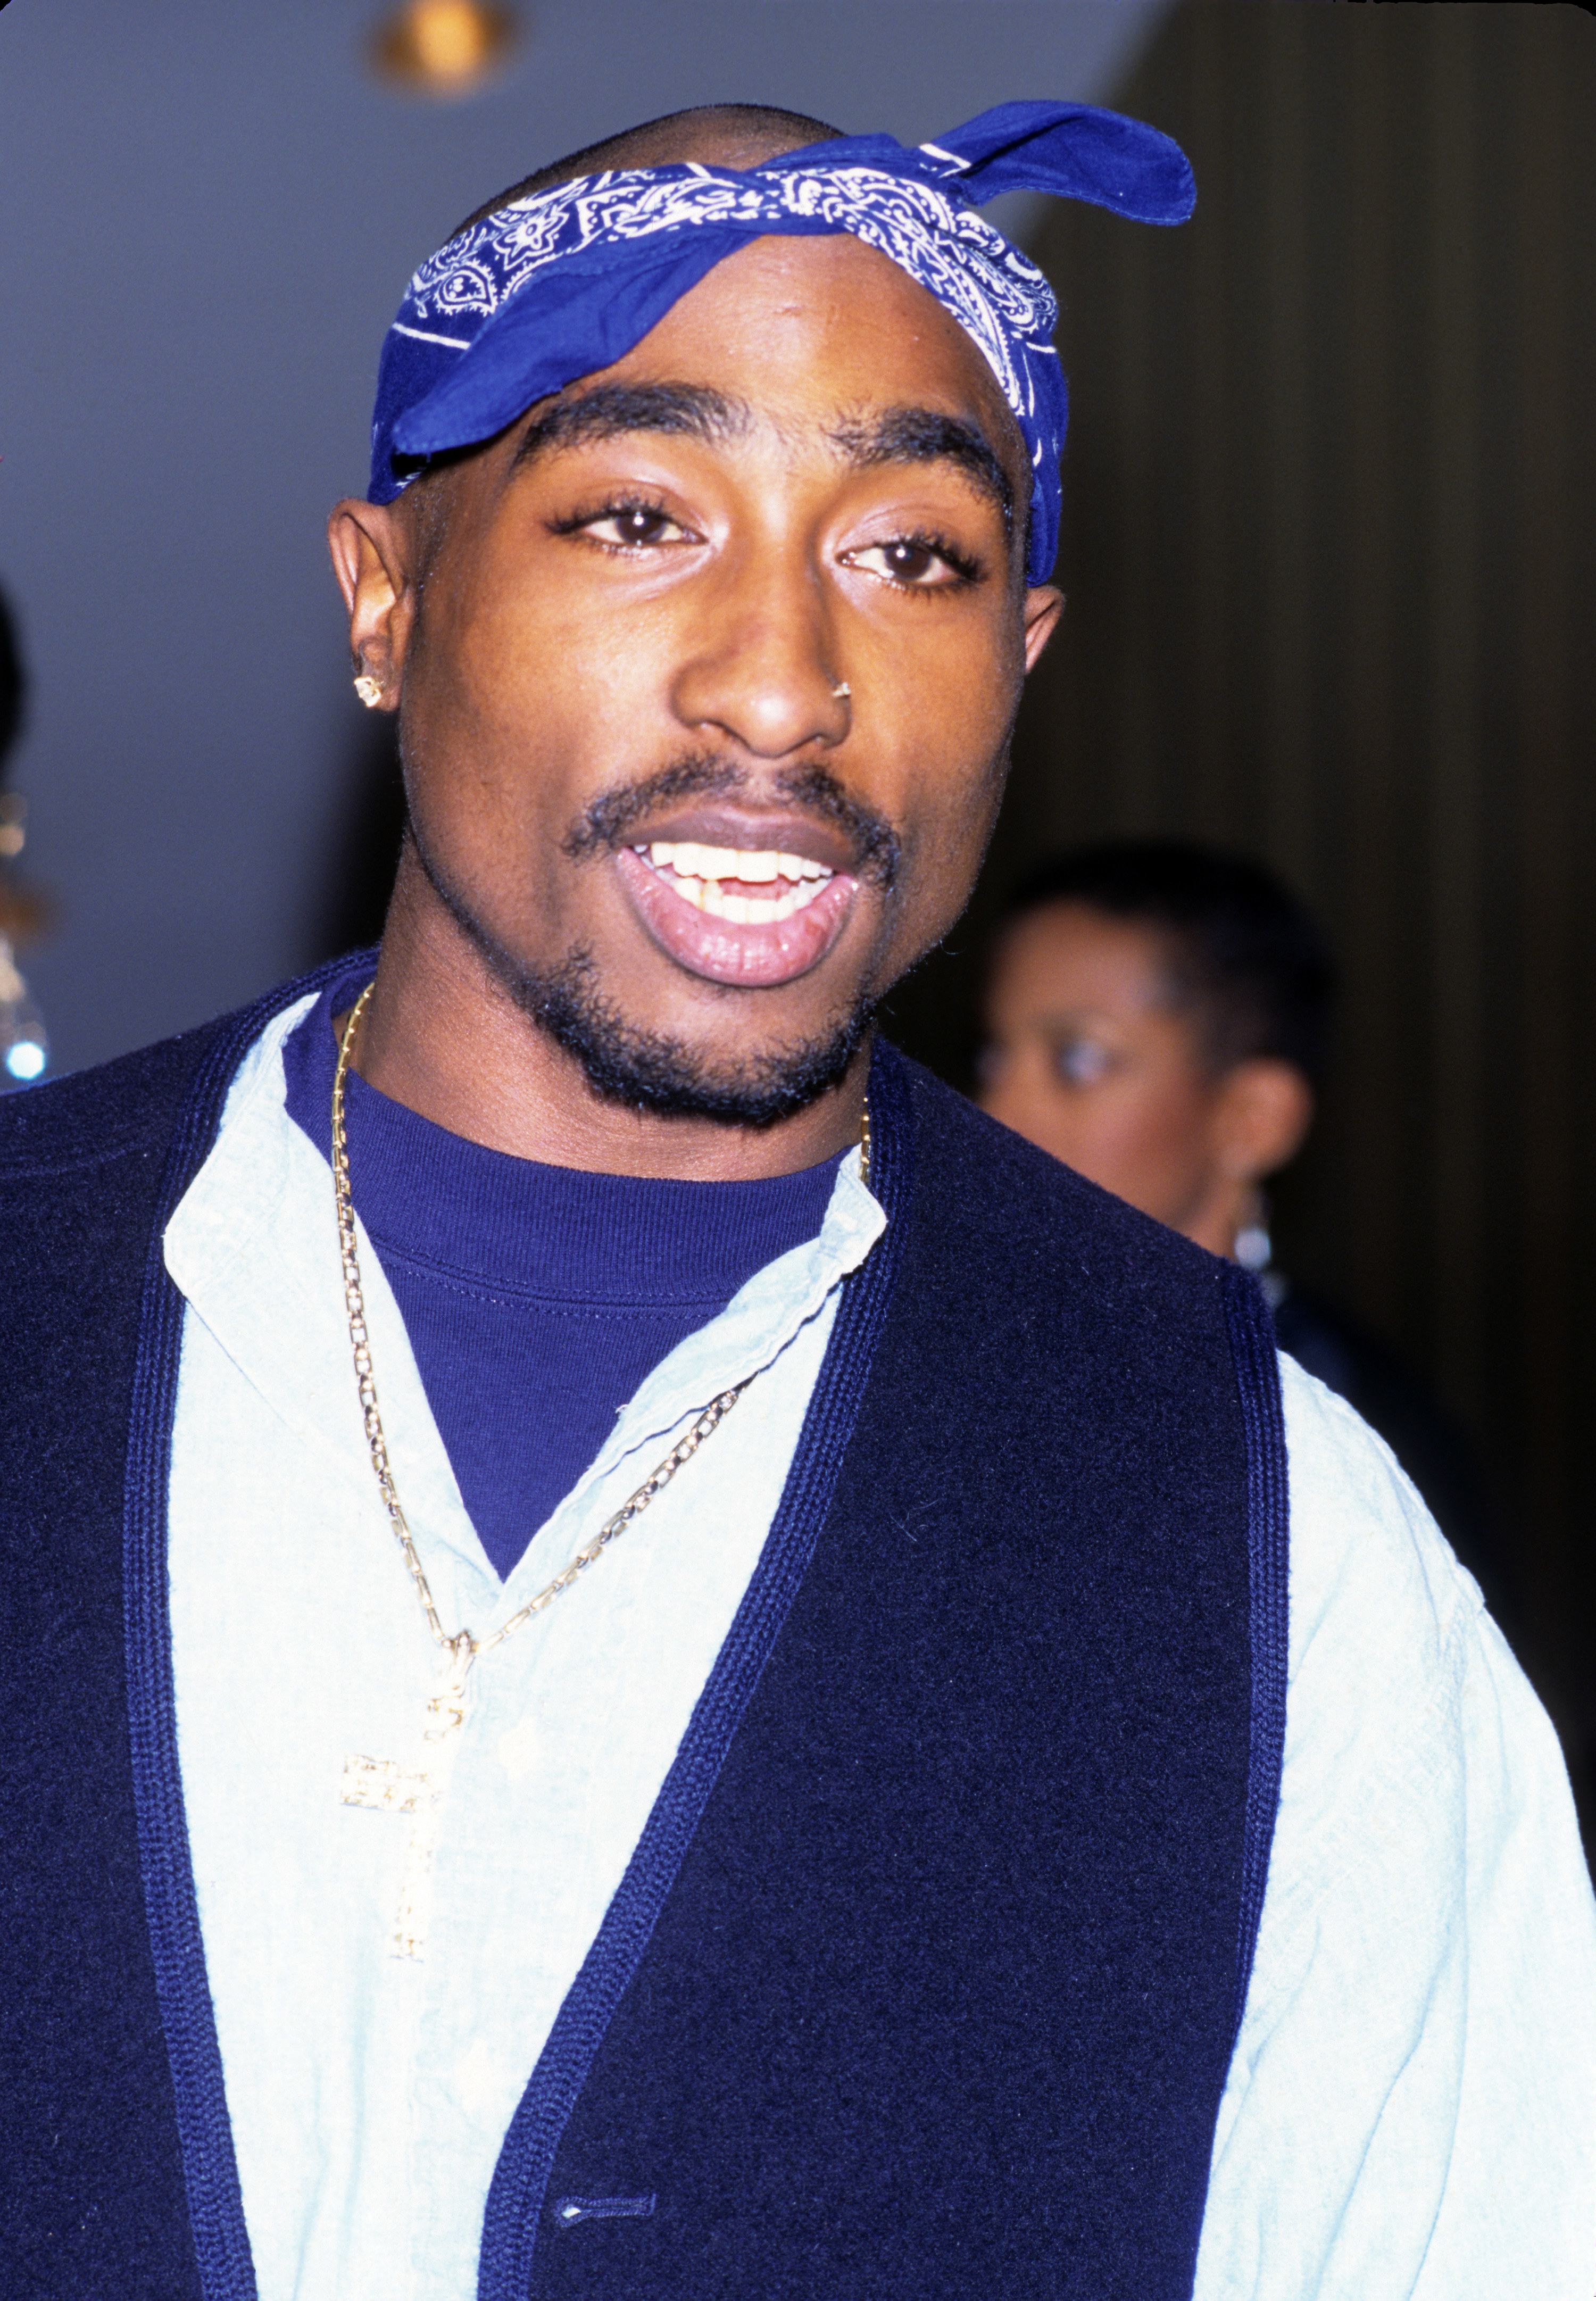 Rapper and actor Tupac Shakur at a movie premiere in 1996